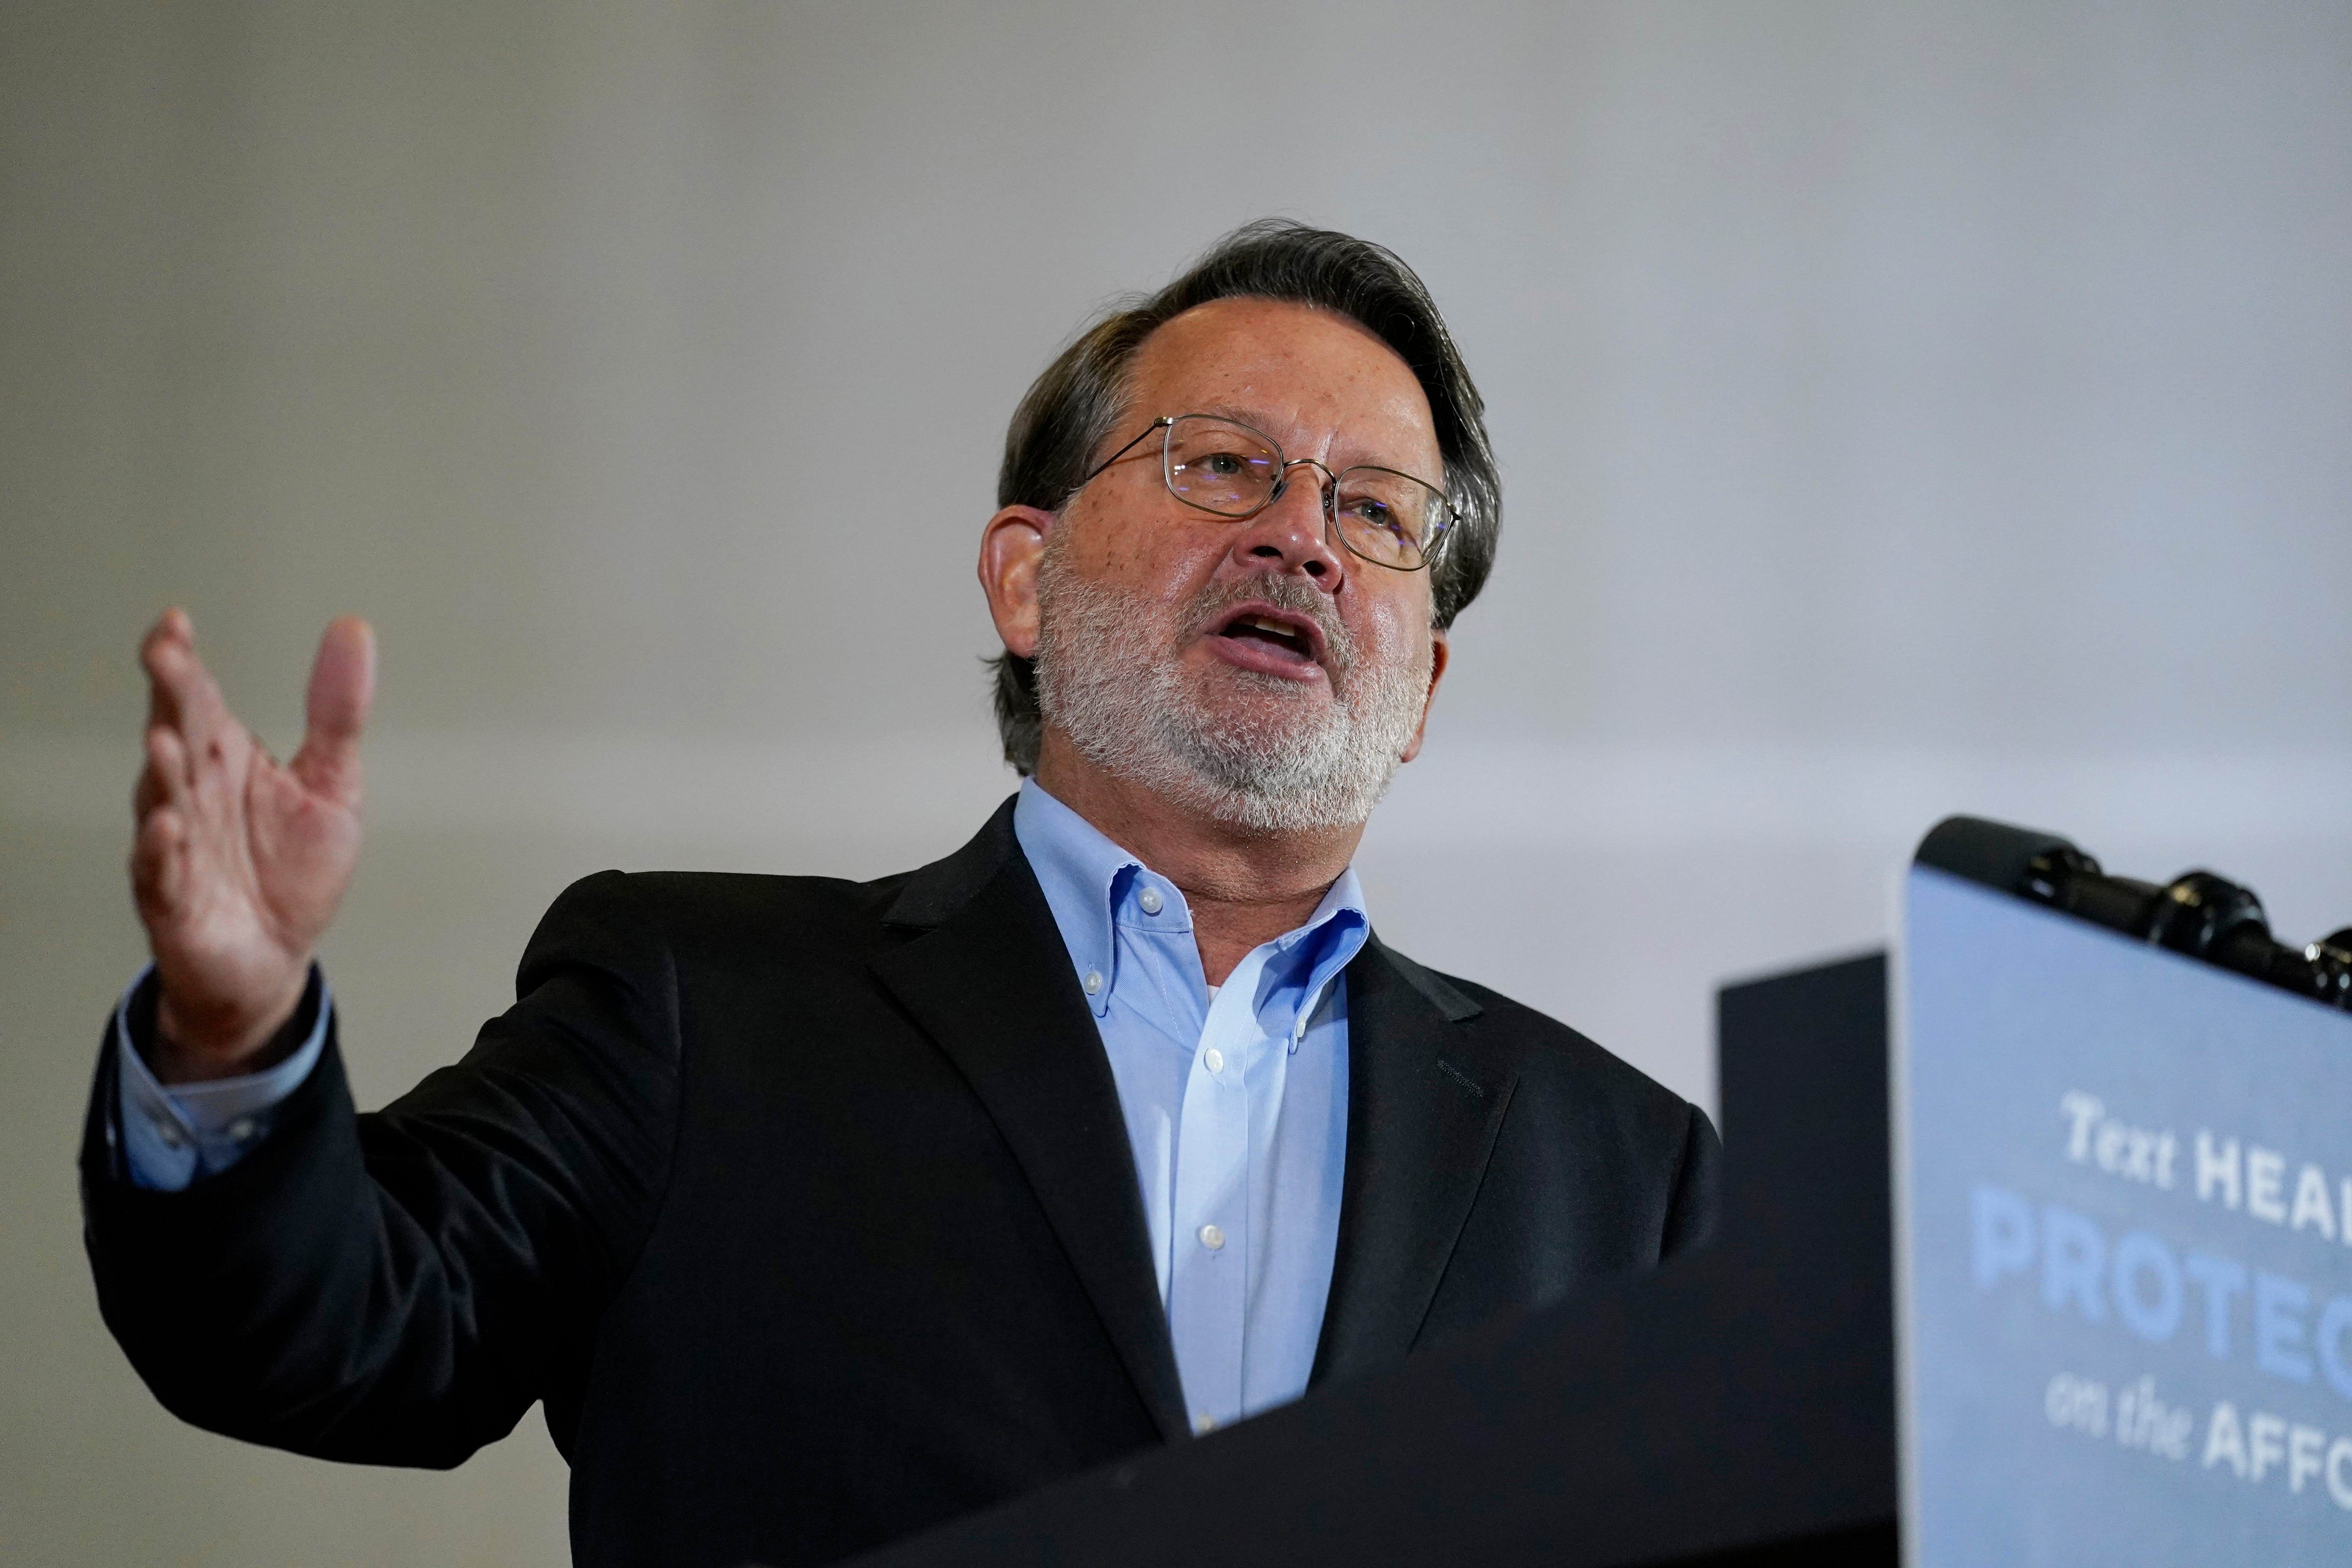 Sen. Gary Peters, D-Mich., speaks during an event with Democratic presidential candidate former Vice President Joe Biden at Beech Woods Recreation Center, in Southfield, Mich., Friday, Oct. 16, 2020.